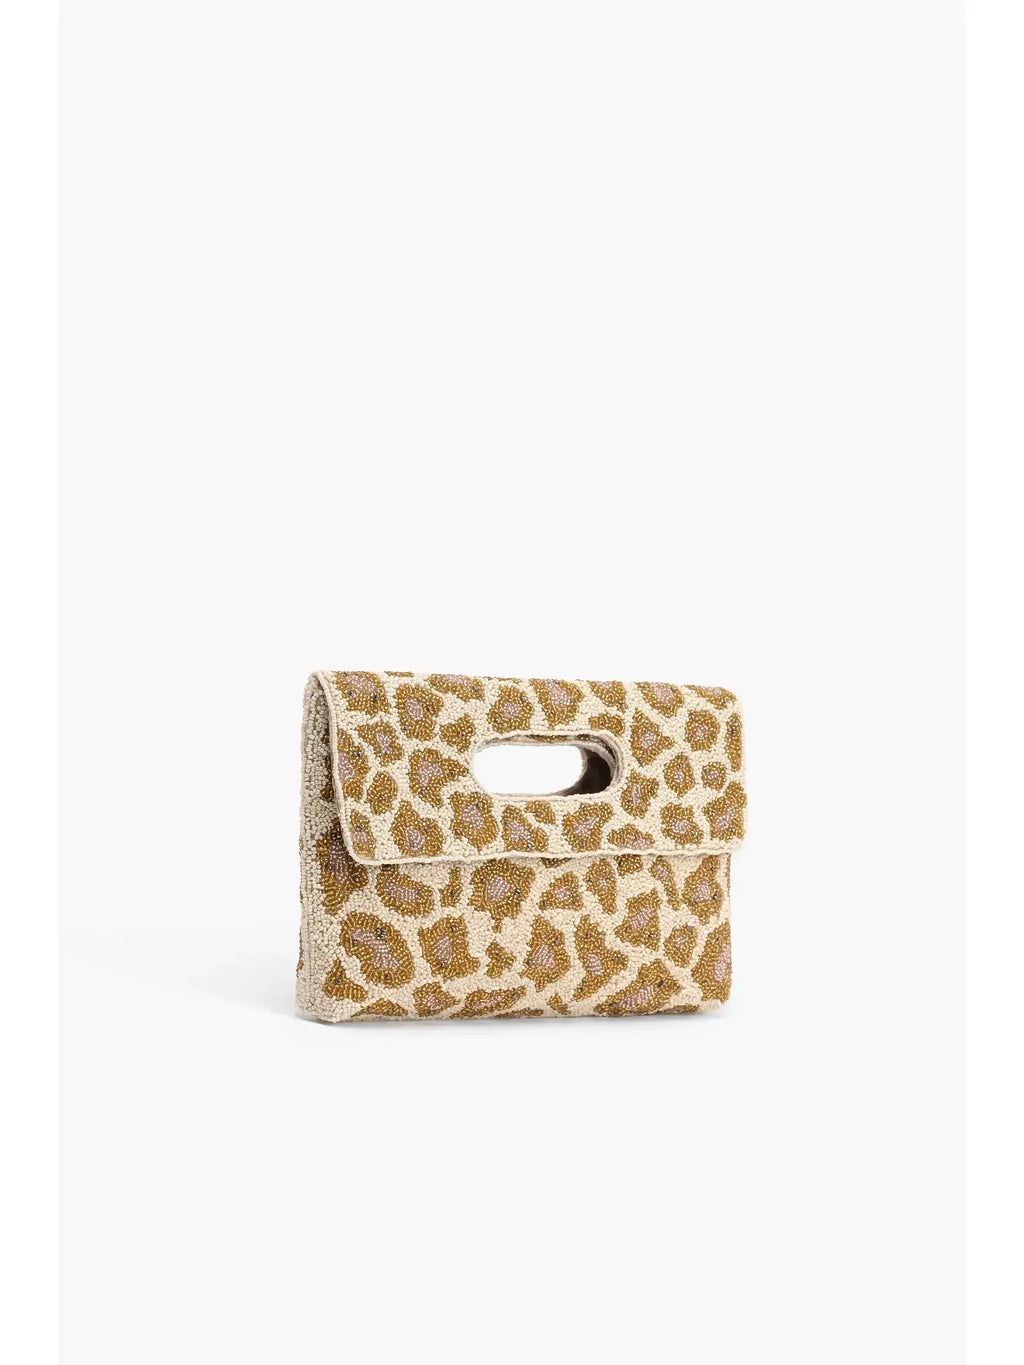 America and Beyond Rose Gold Leopard Clutch | Social Threads